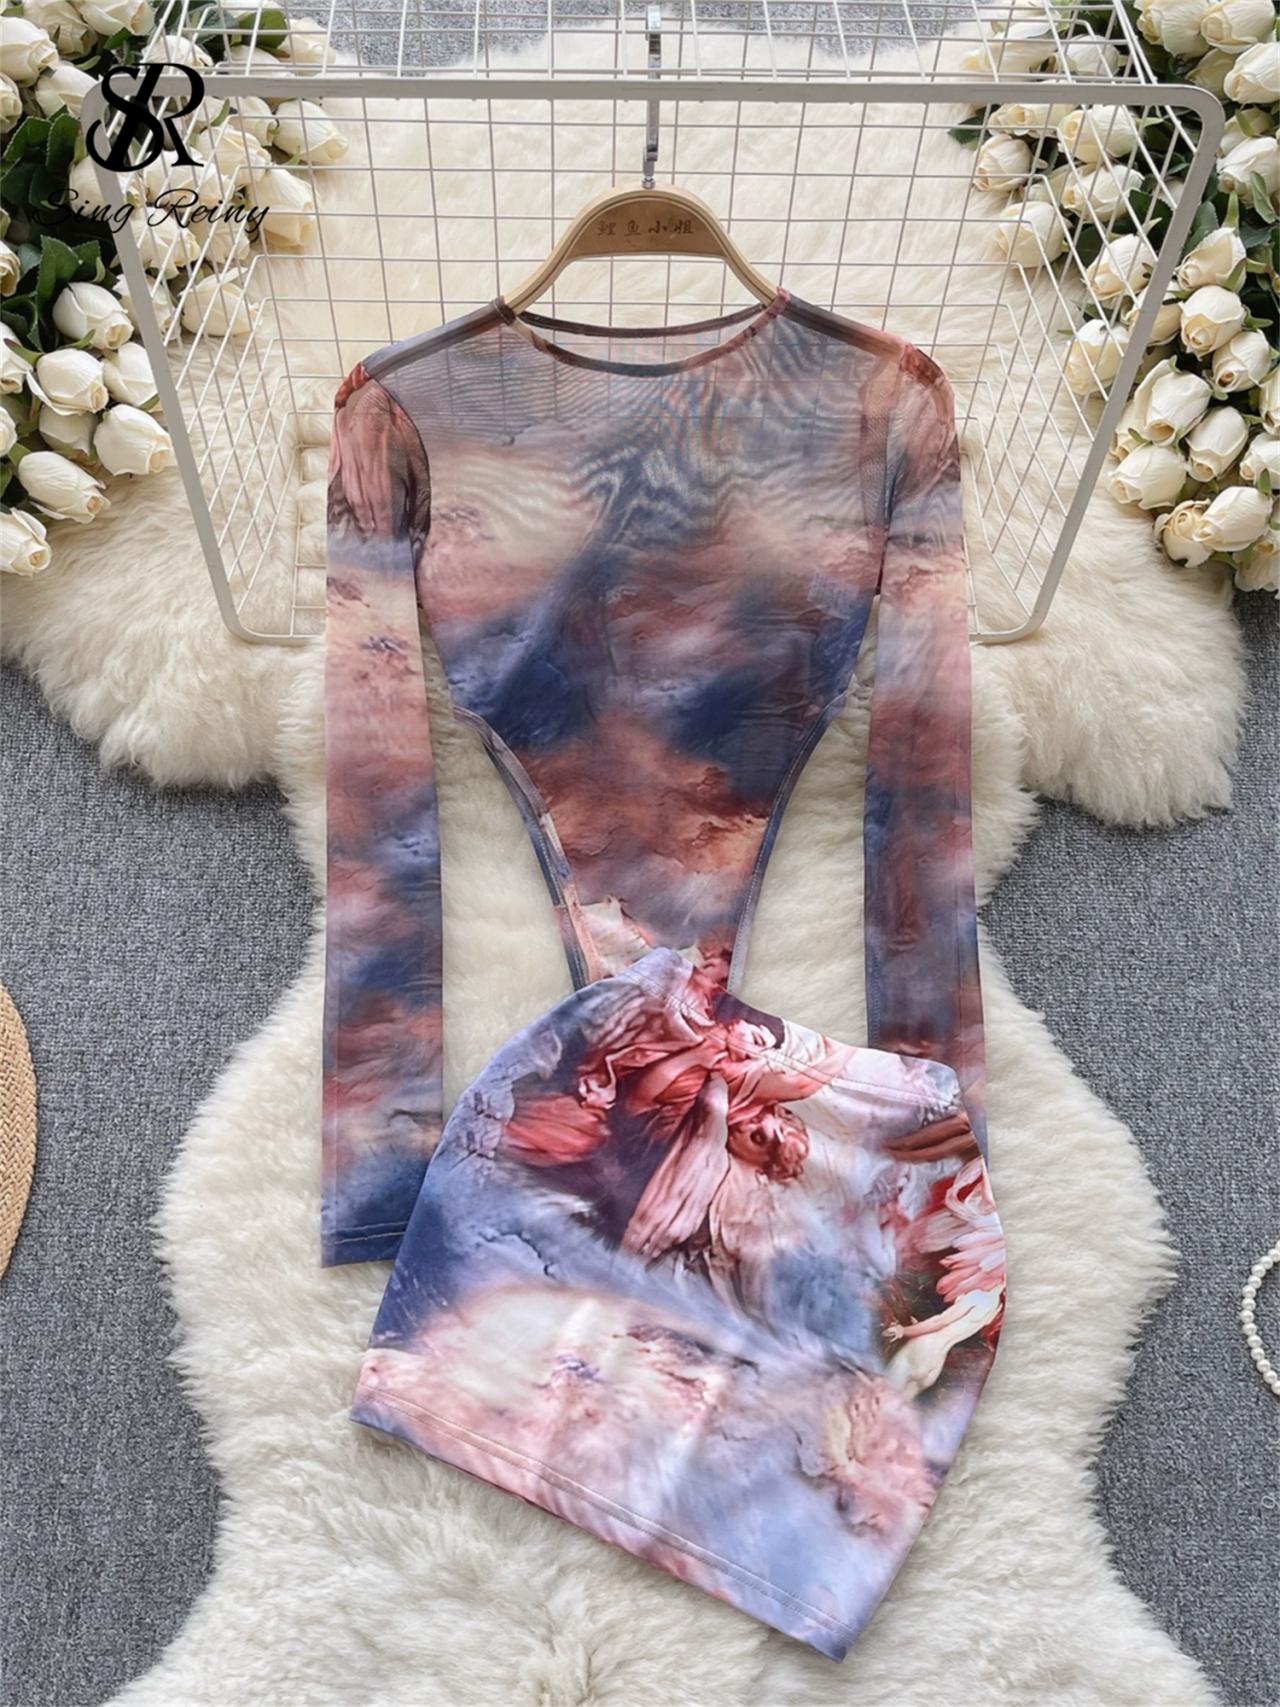 Fashion Hotsweet Two Pieces Suits O Neck Long Sleeved Transparent Bodysuit Top+ Skinny Mini Skirt Tie Dye Print Sets